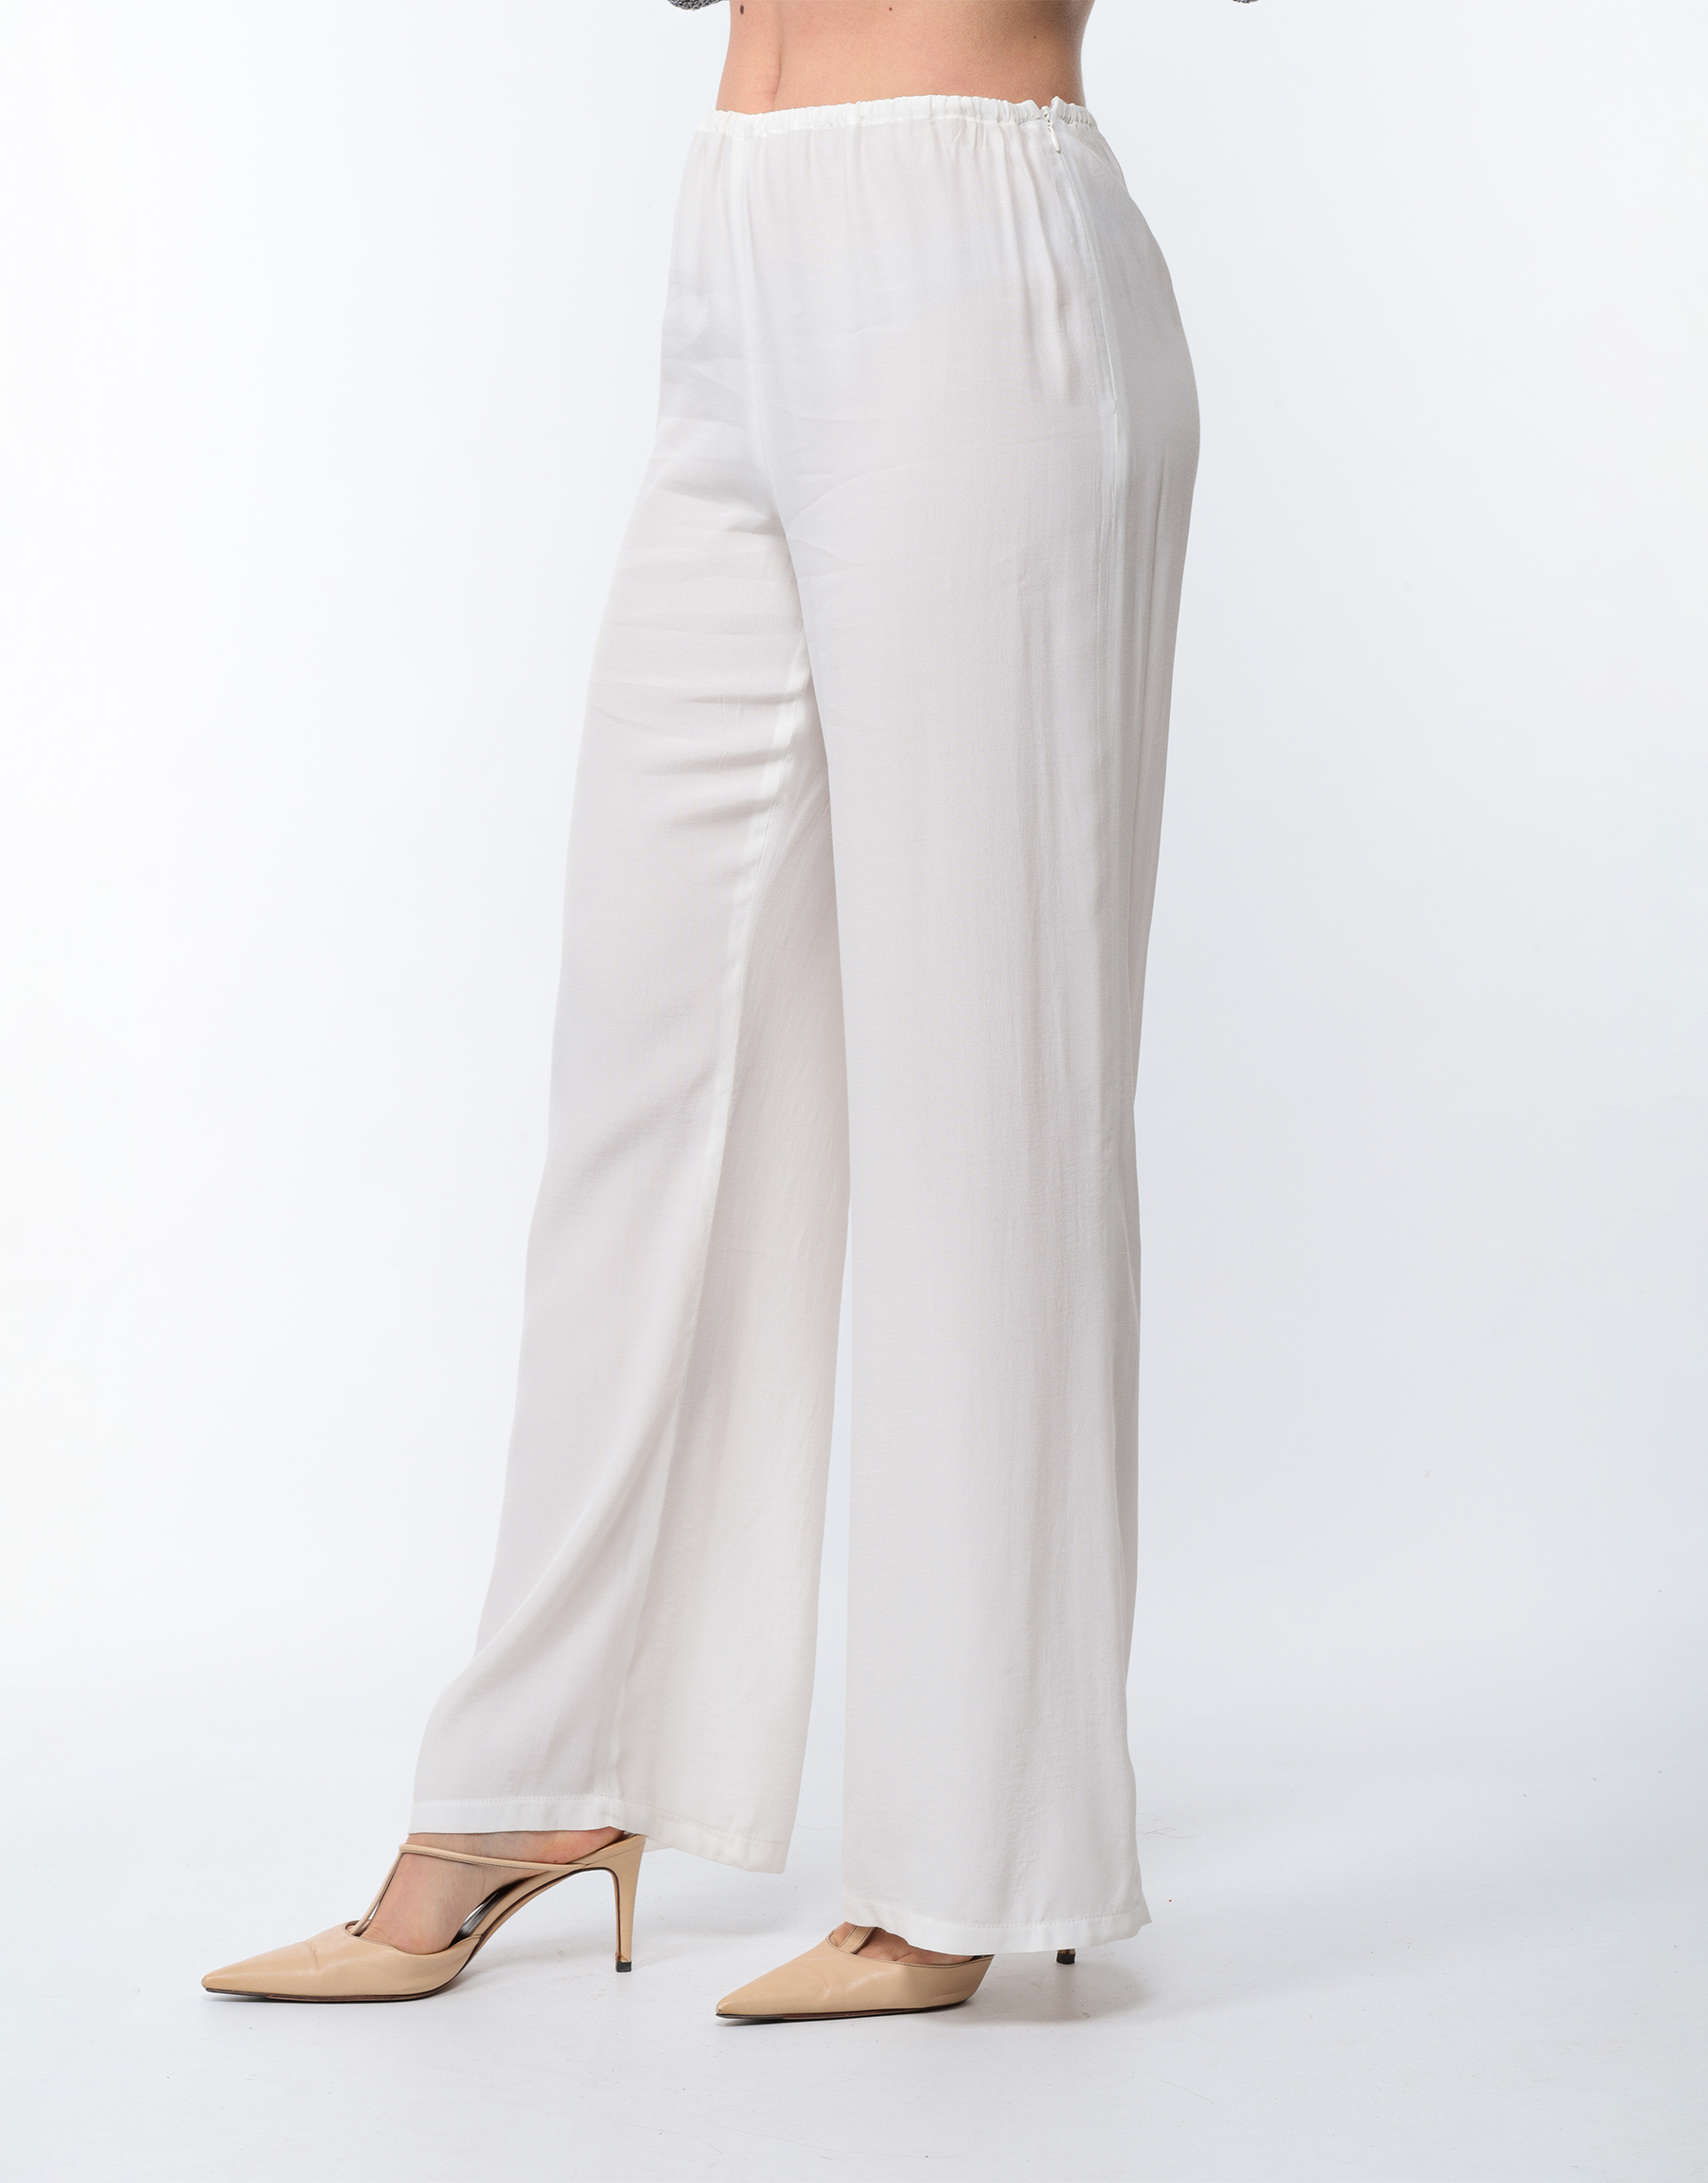 Flowing summer trousers in cotton crepe and white viscose or viscose and lilac silk